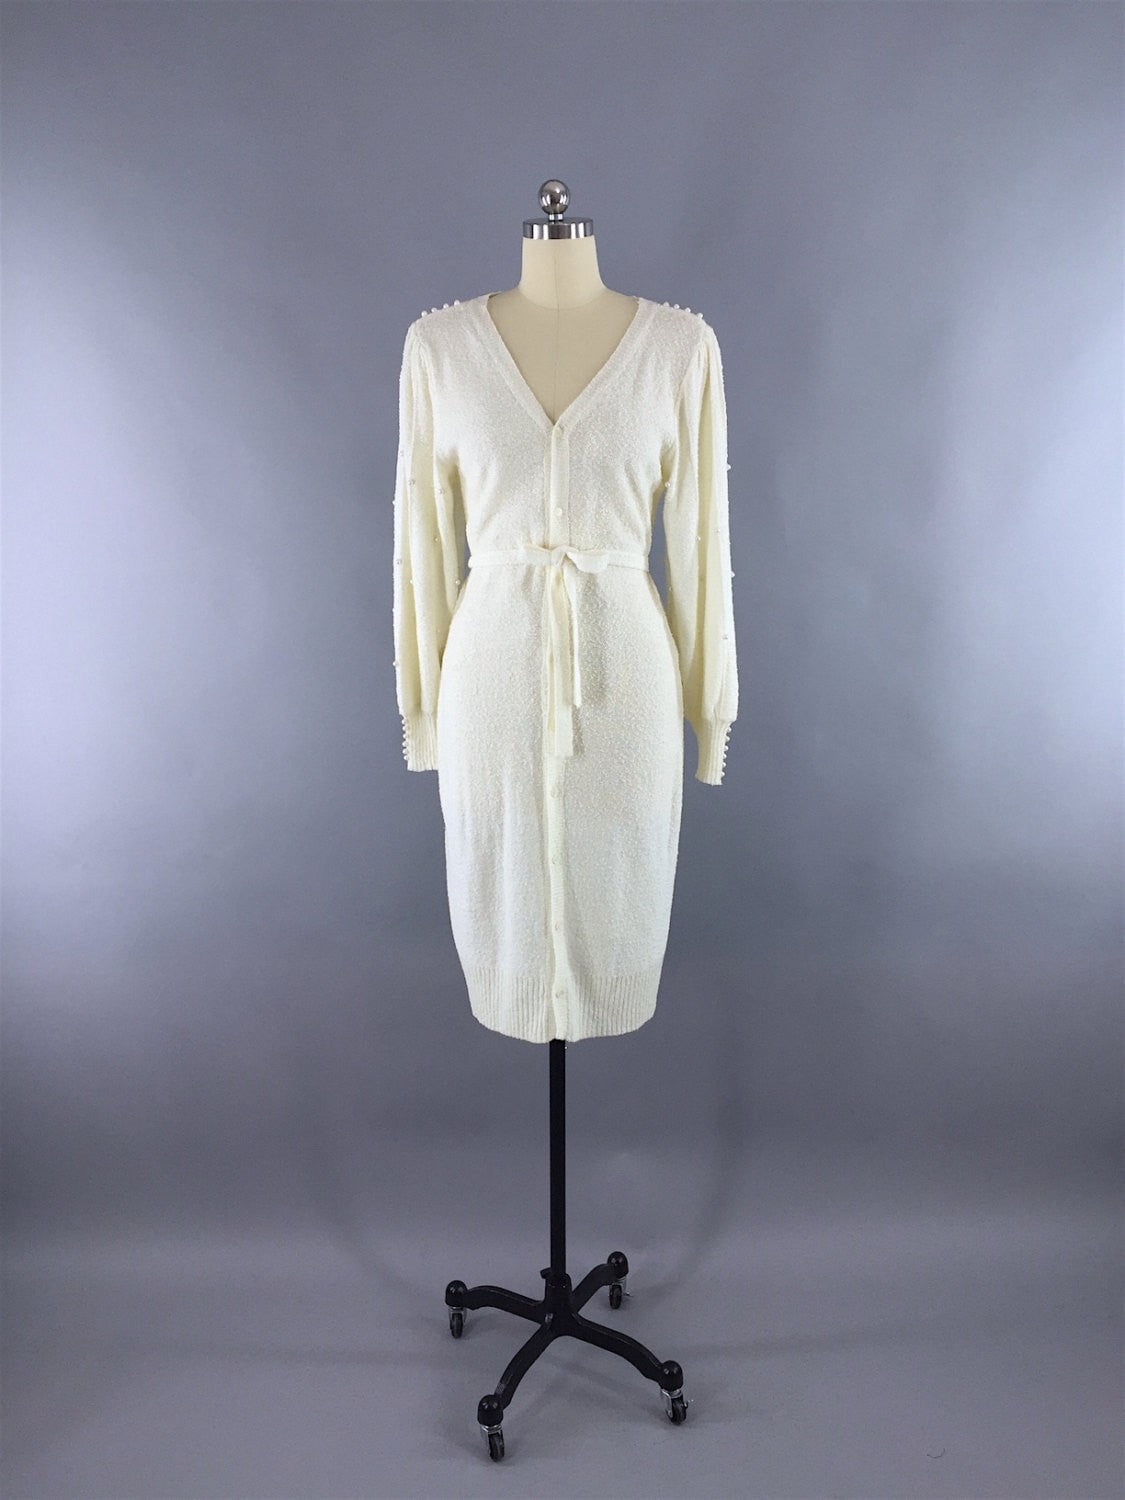 Vintage 1980s Sweater Dress / Ivory Knit with Pearl Trim - ThisBlueBird